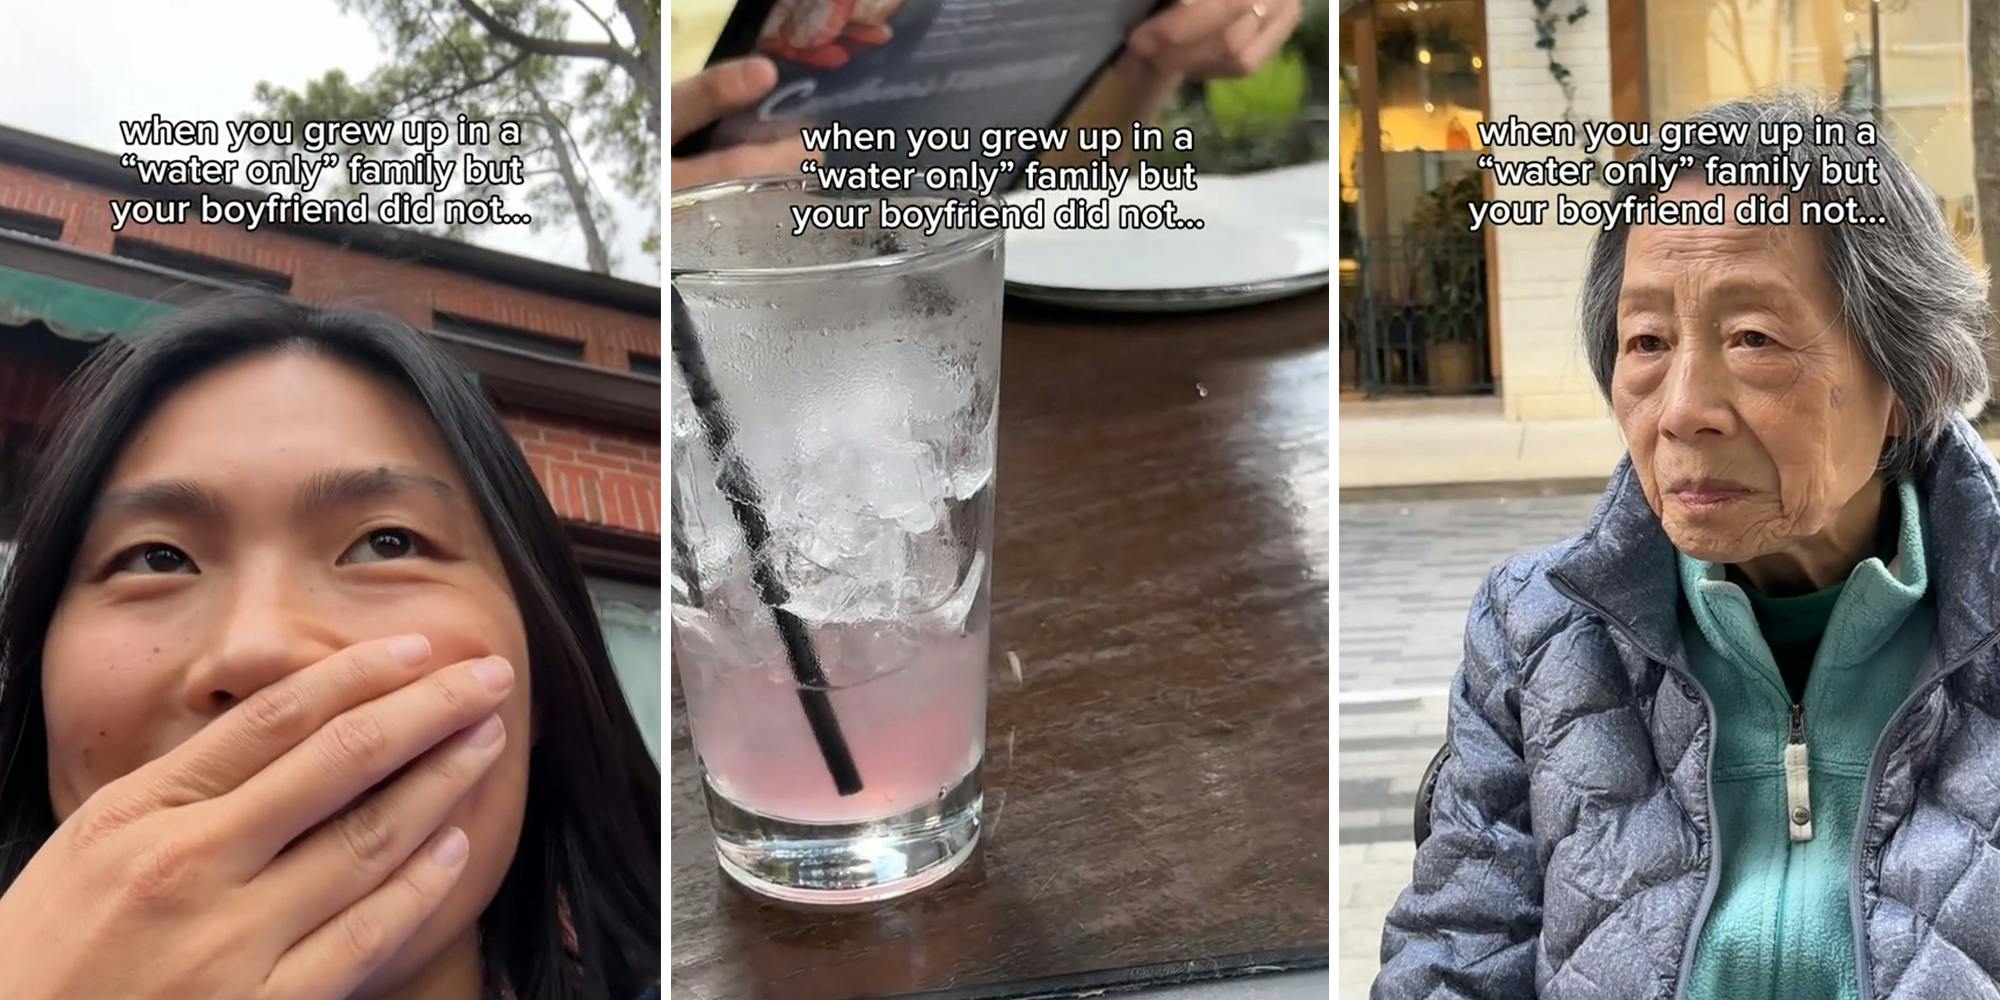 Woman’s boyfriend goes out to eat with her ‘water only’ family. He orders a drink